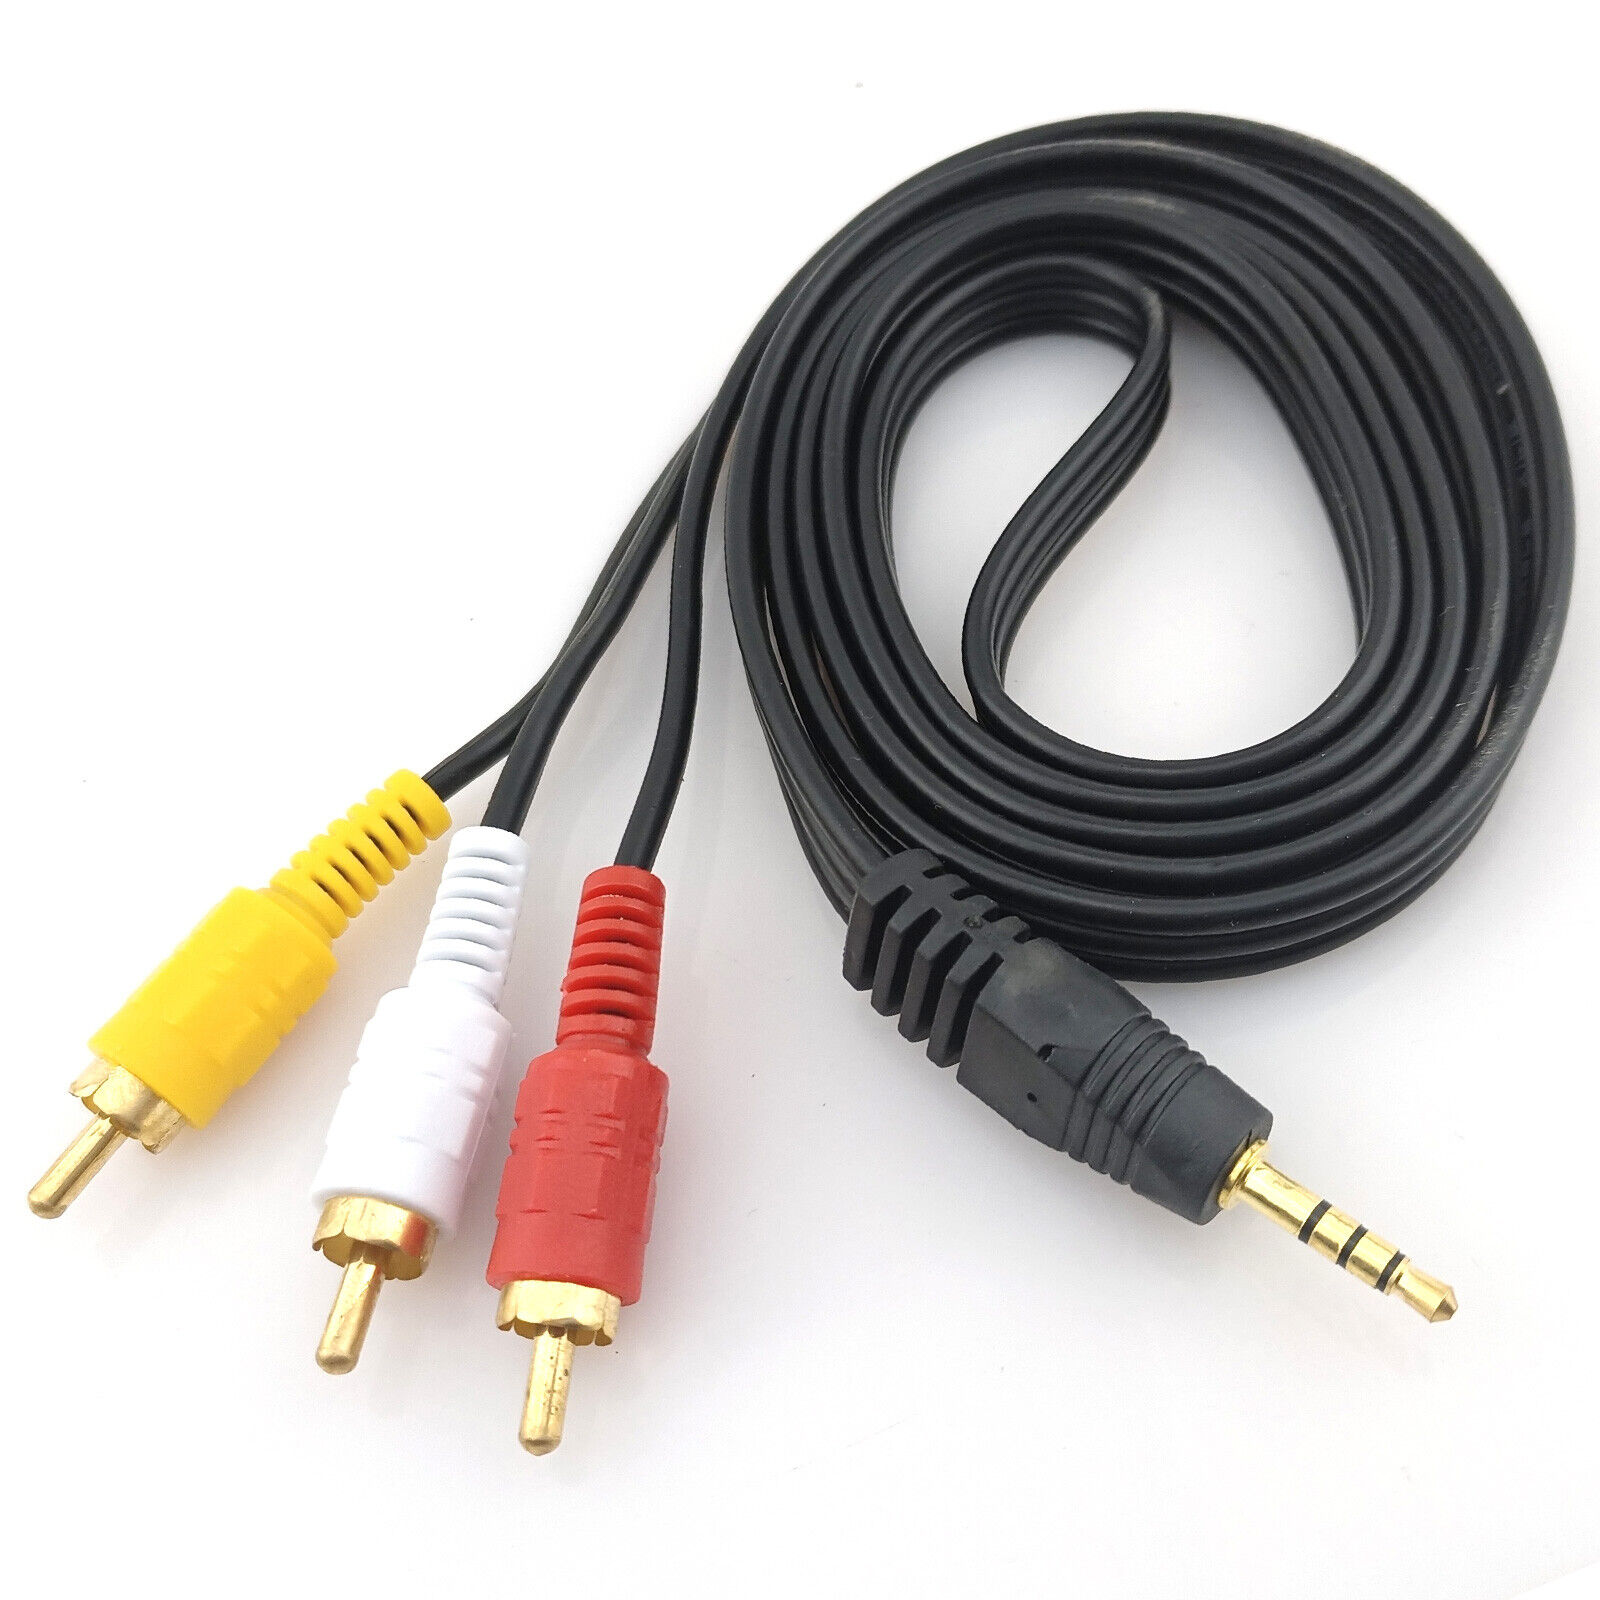 10ft 3.5mm to 3 RCA Video Audio Cable Analog Male Jack TV Box STB Camcorder Wire